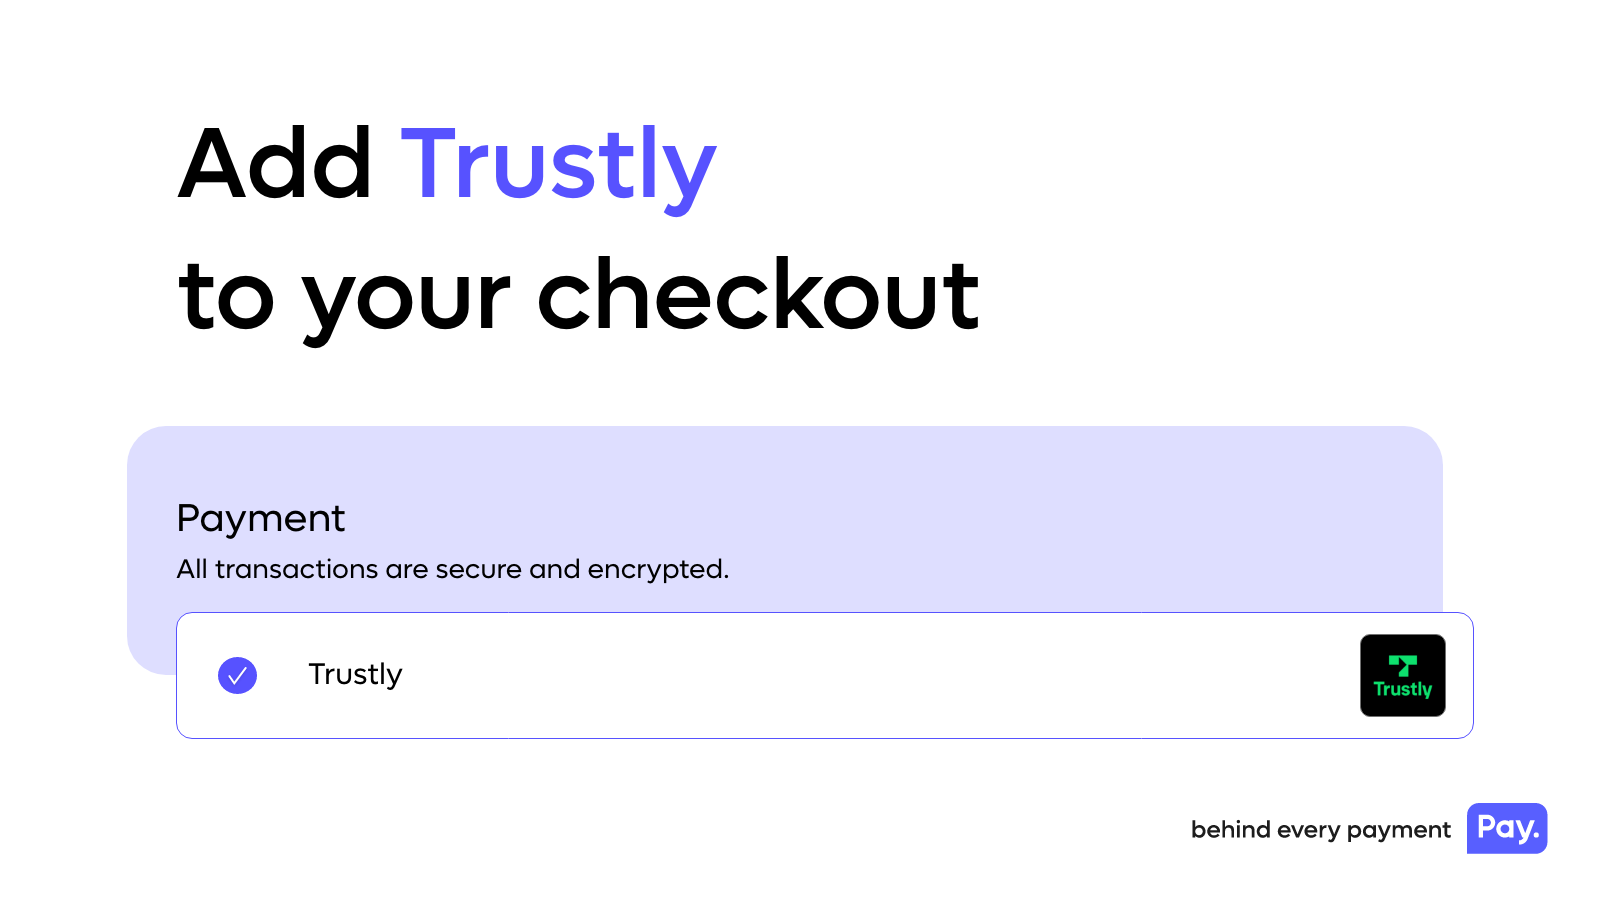 Add Trustly to your checkout